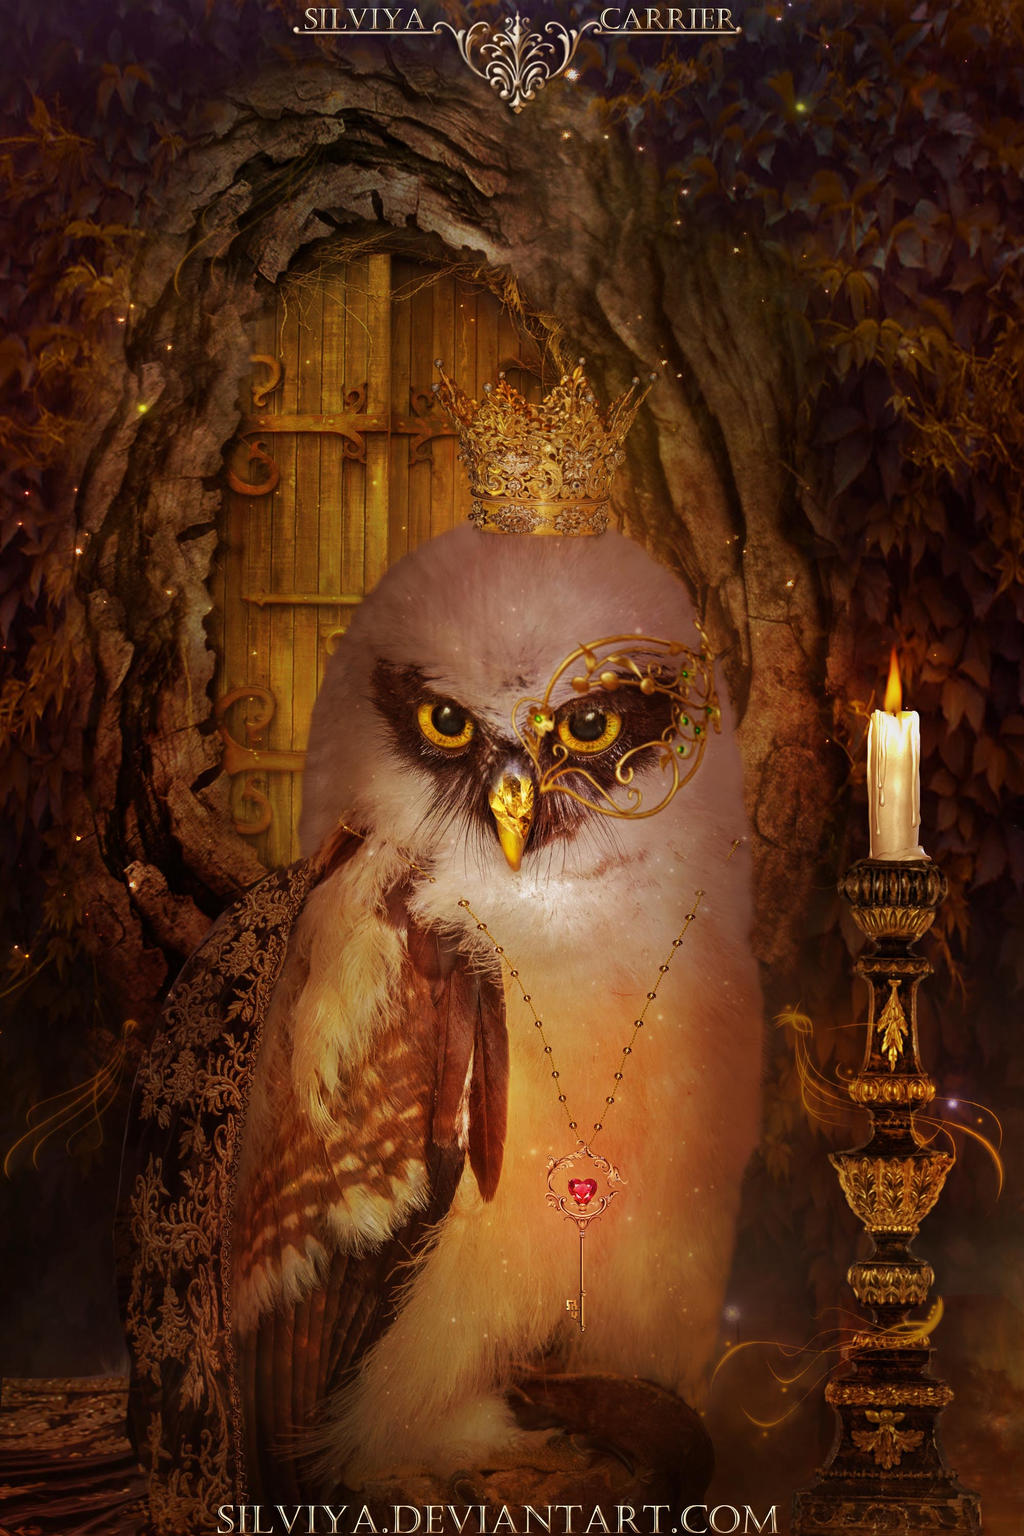 The Owl King